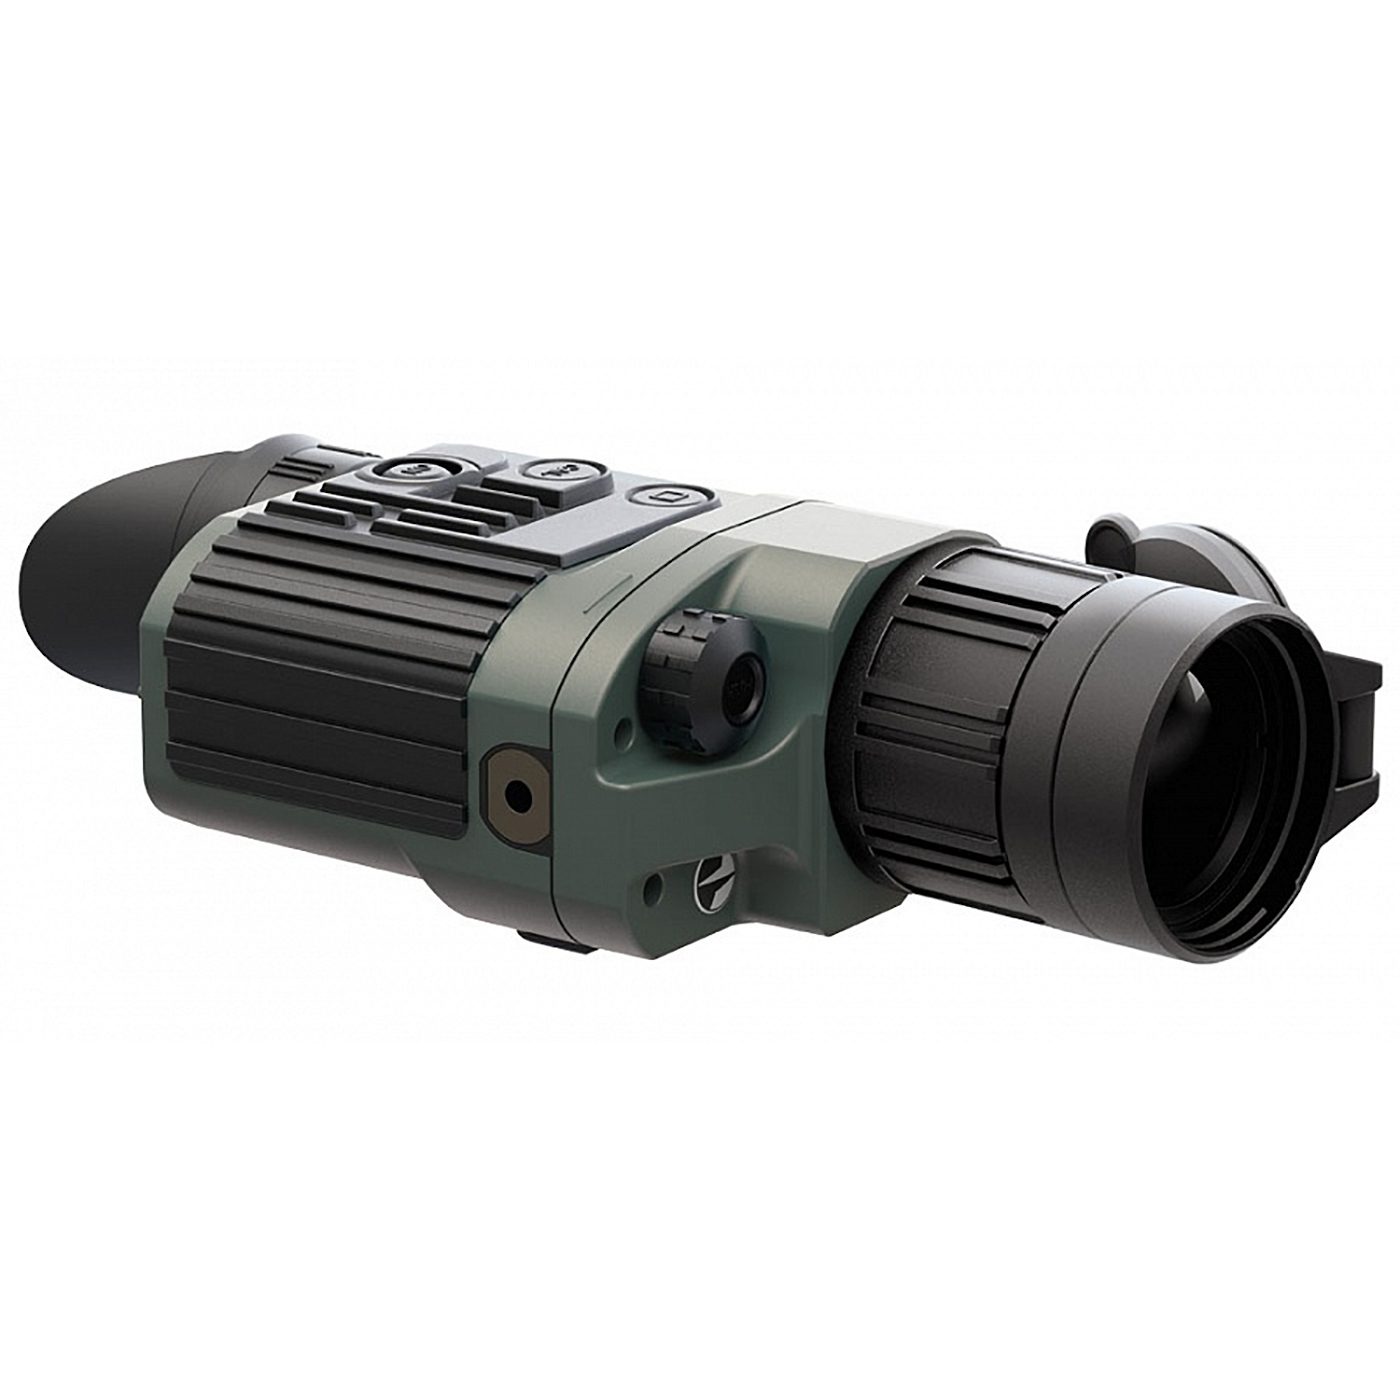 Thermal / Nightvision & Infrared